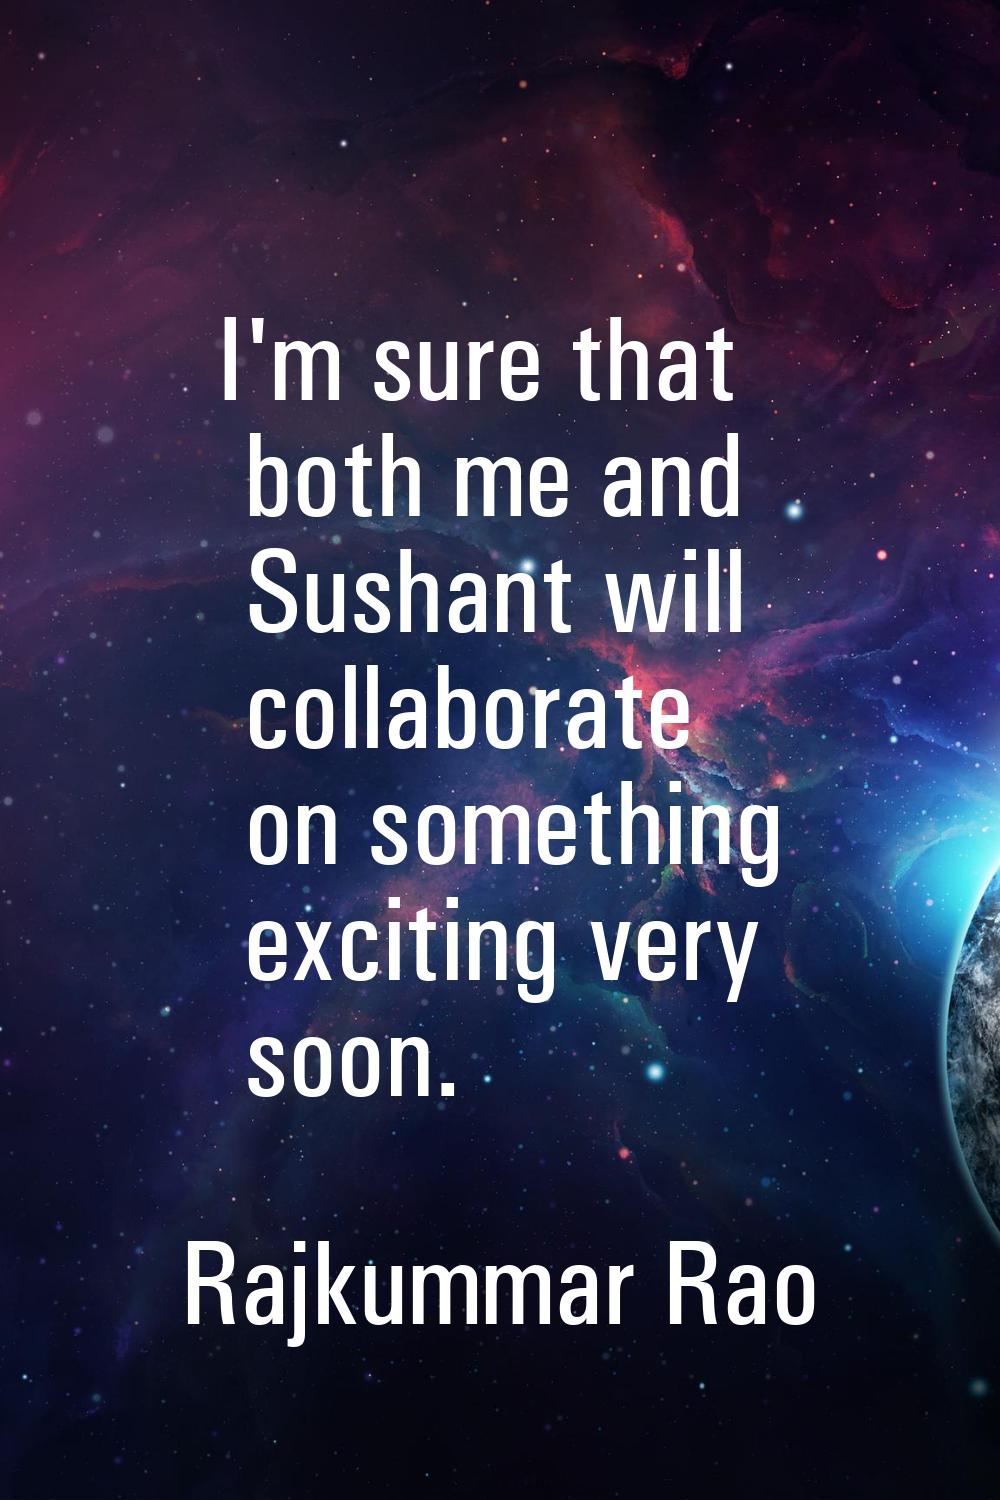 I'm sure that both me and Sushant will collaborate on something exciting very soon.